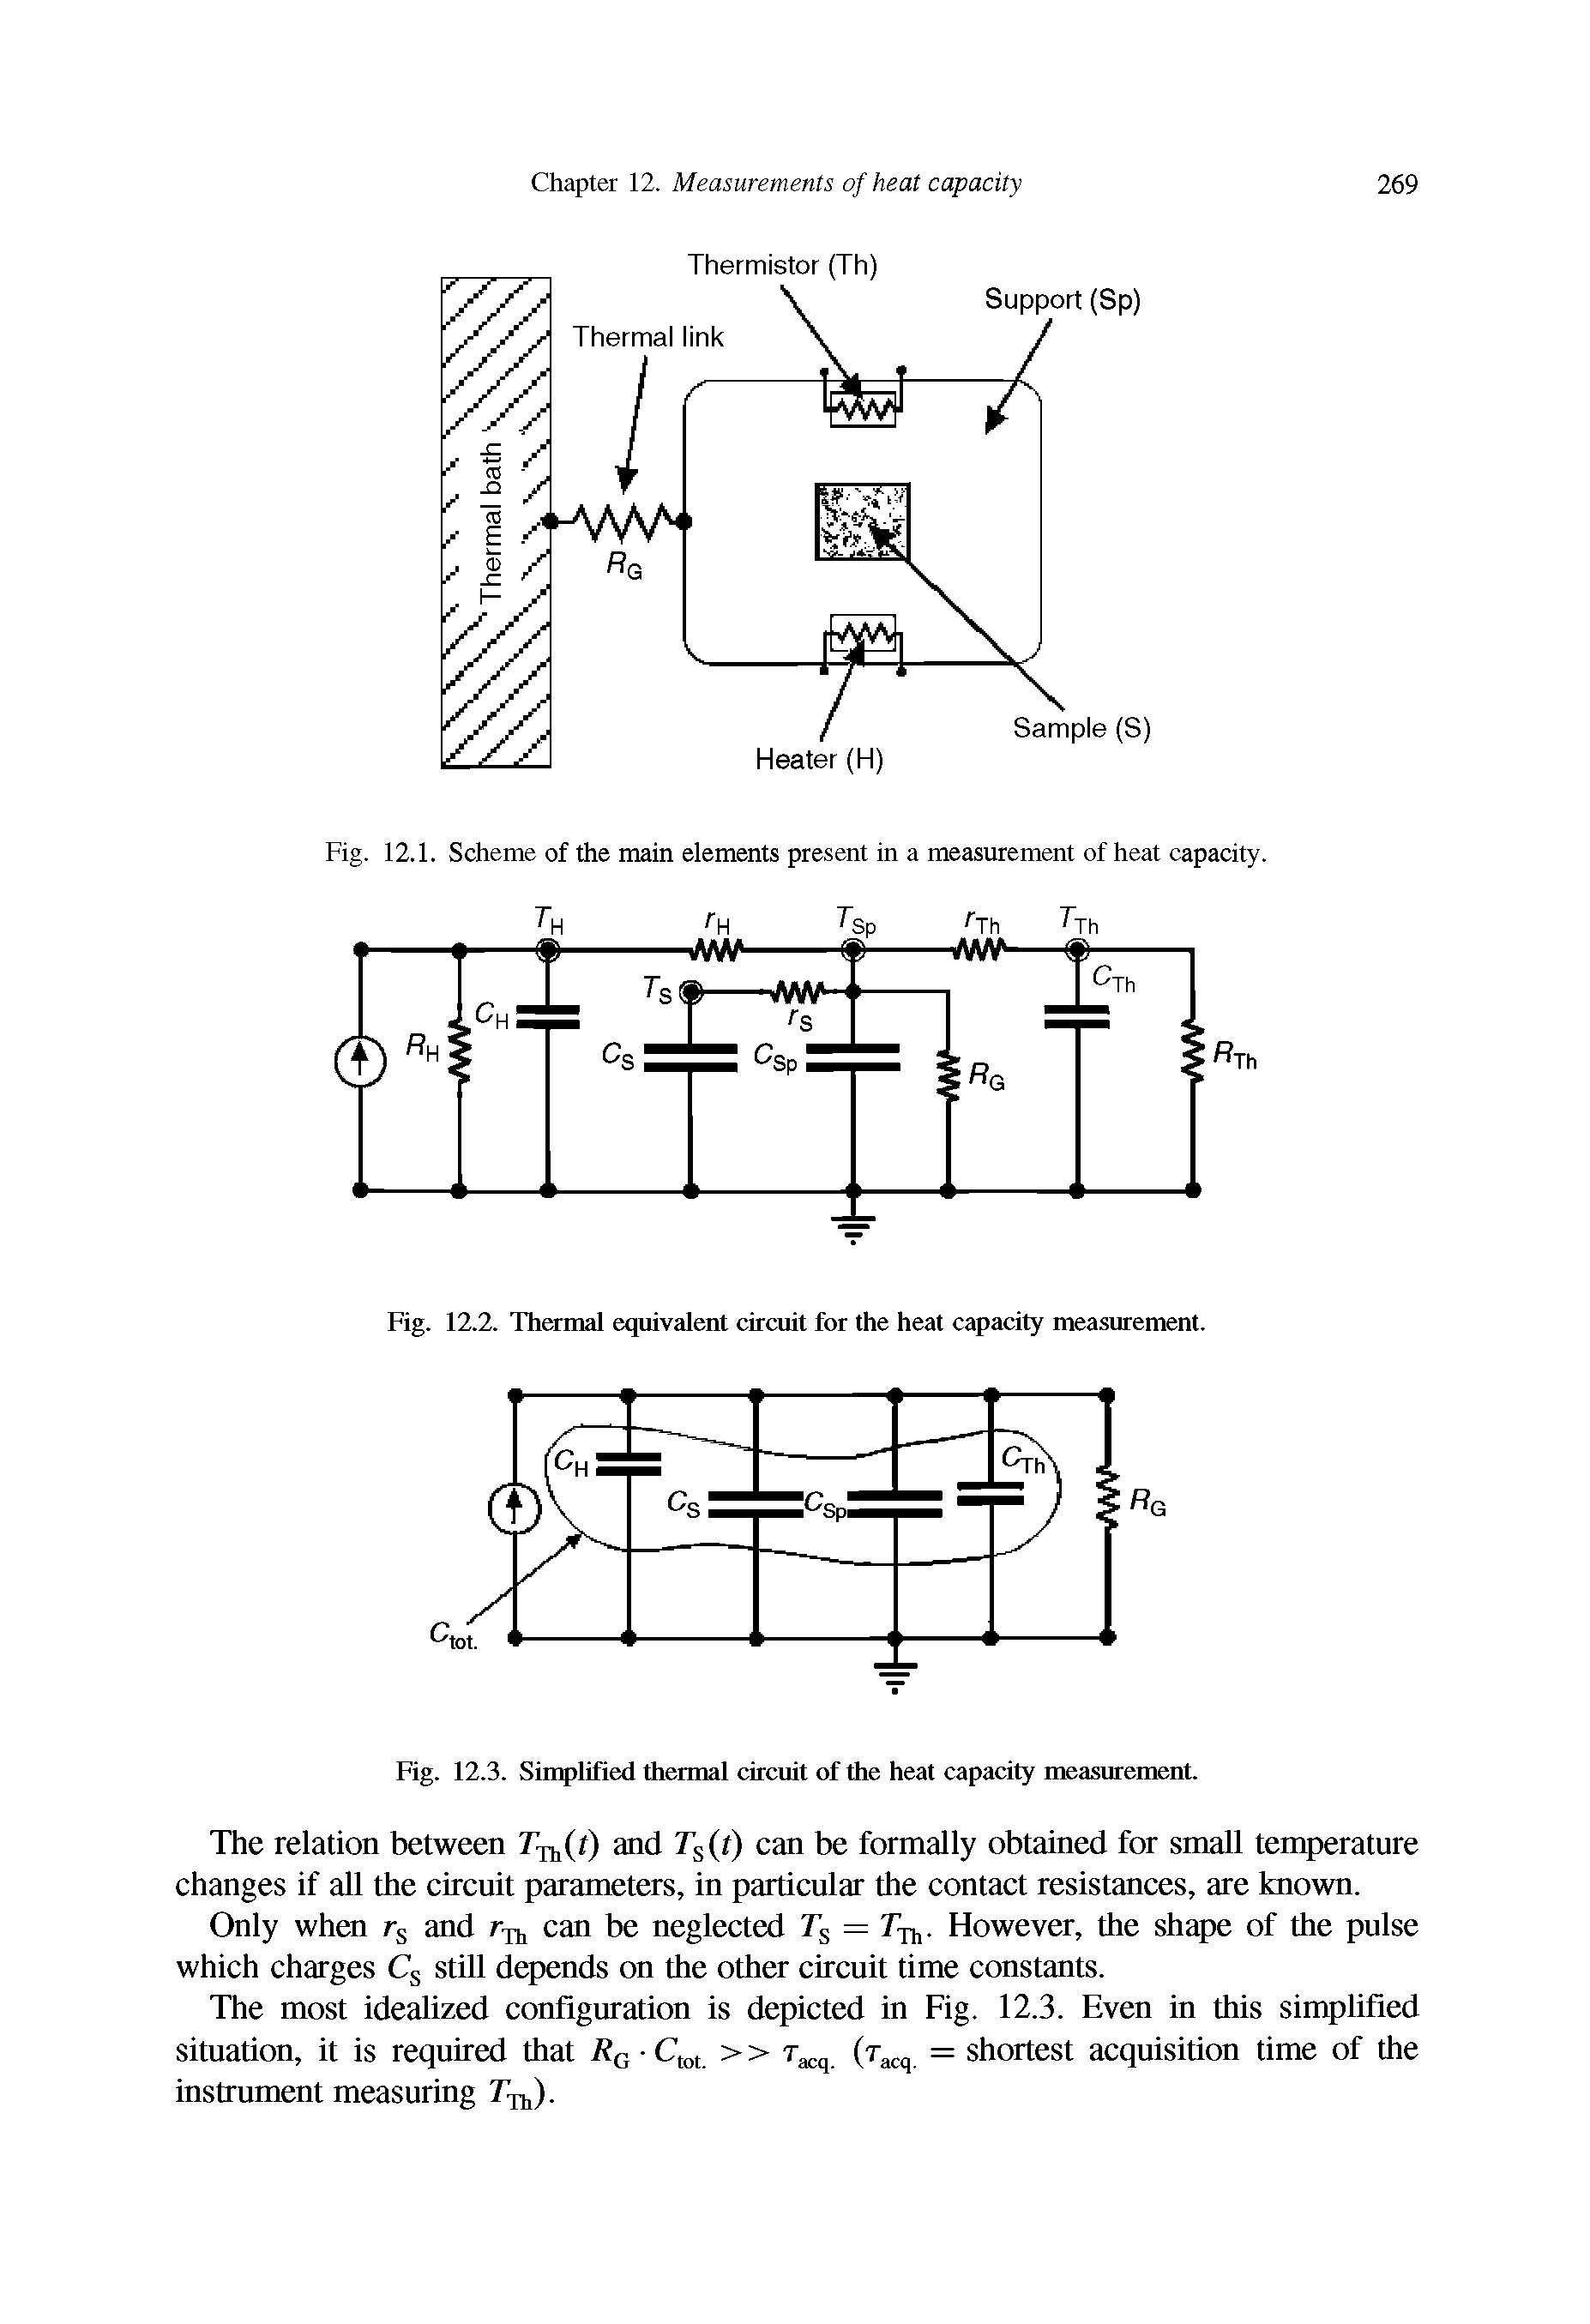 Fig. 12.2. Thermal equivalent circuit for the heat capacity measurement.